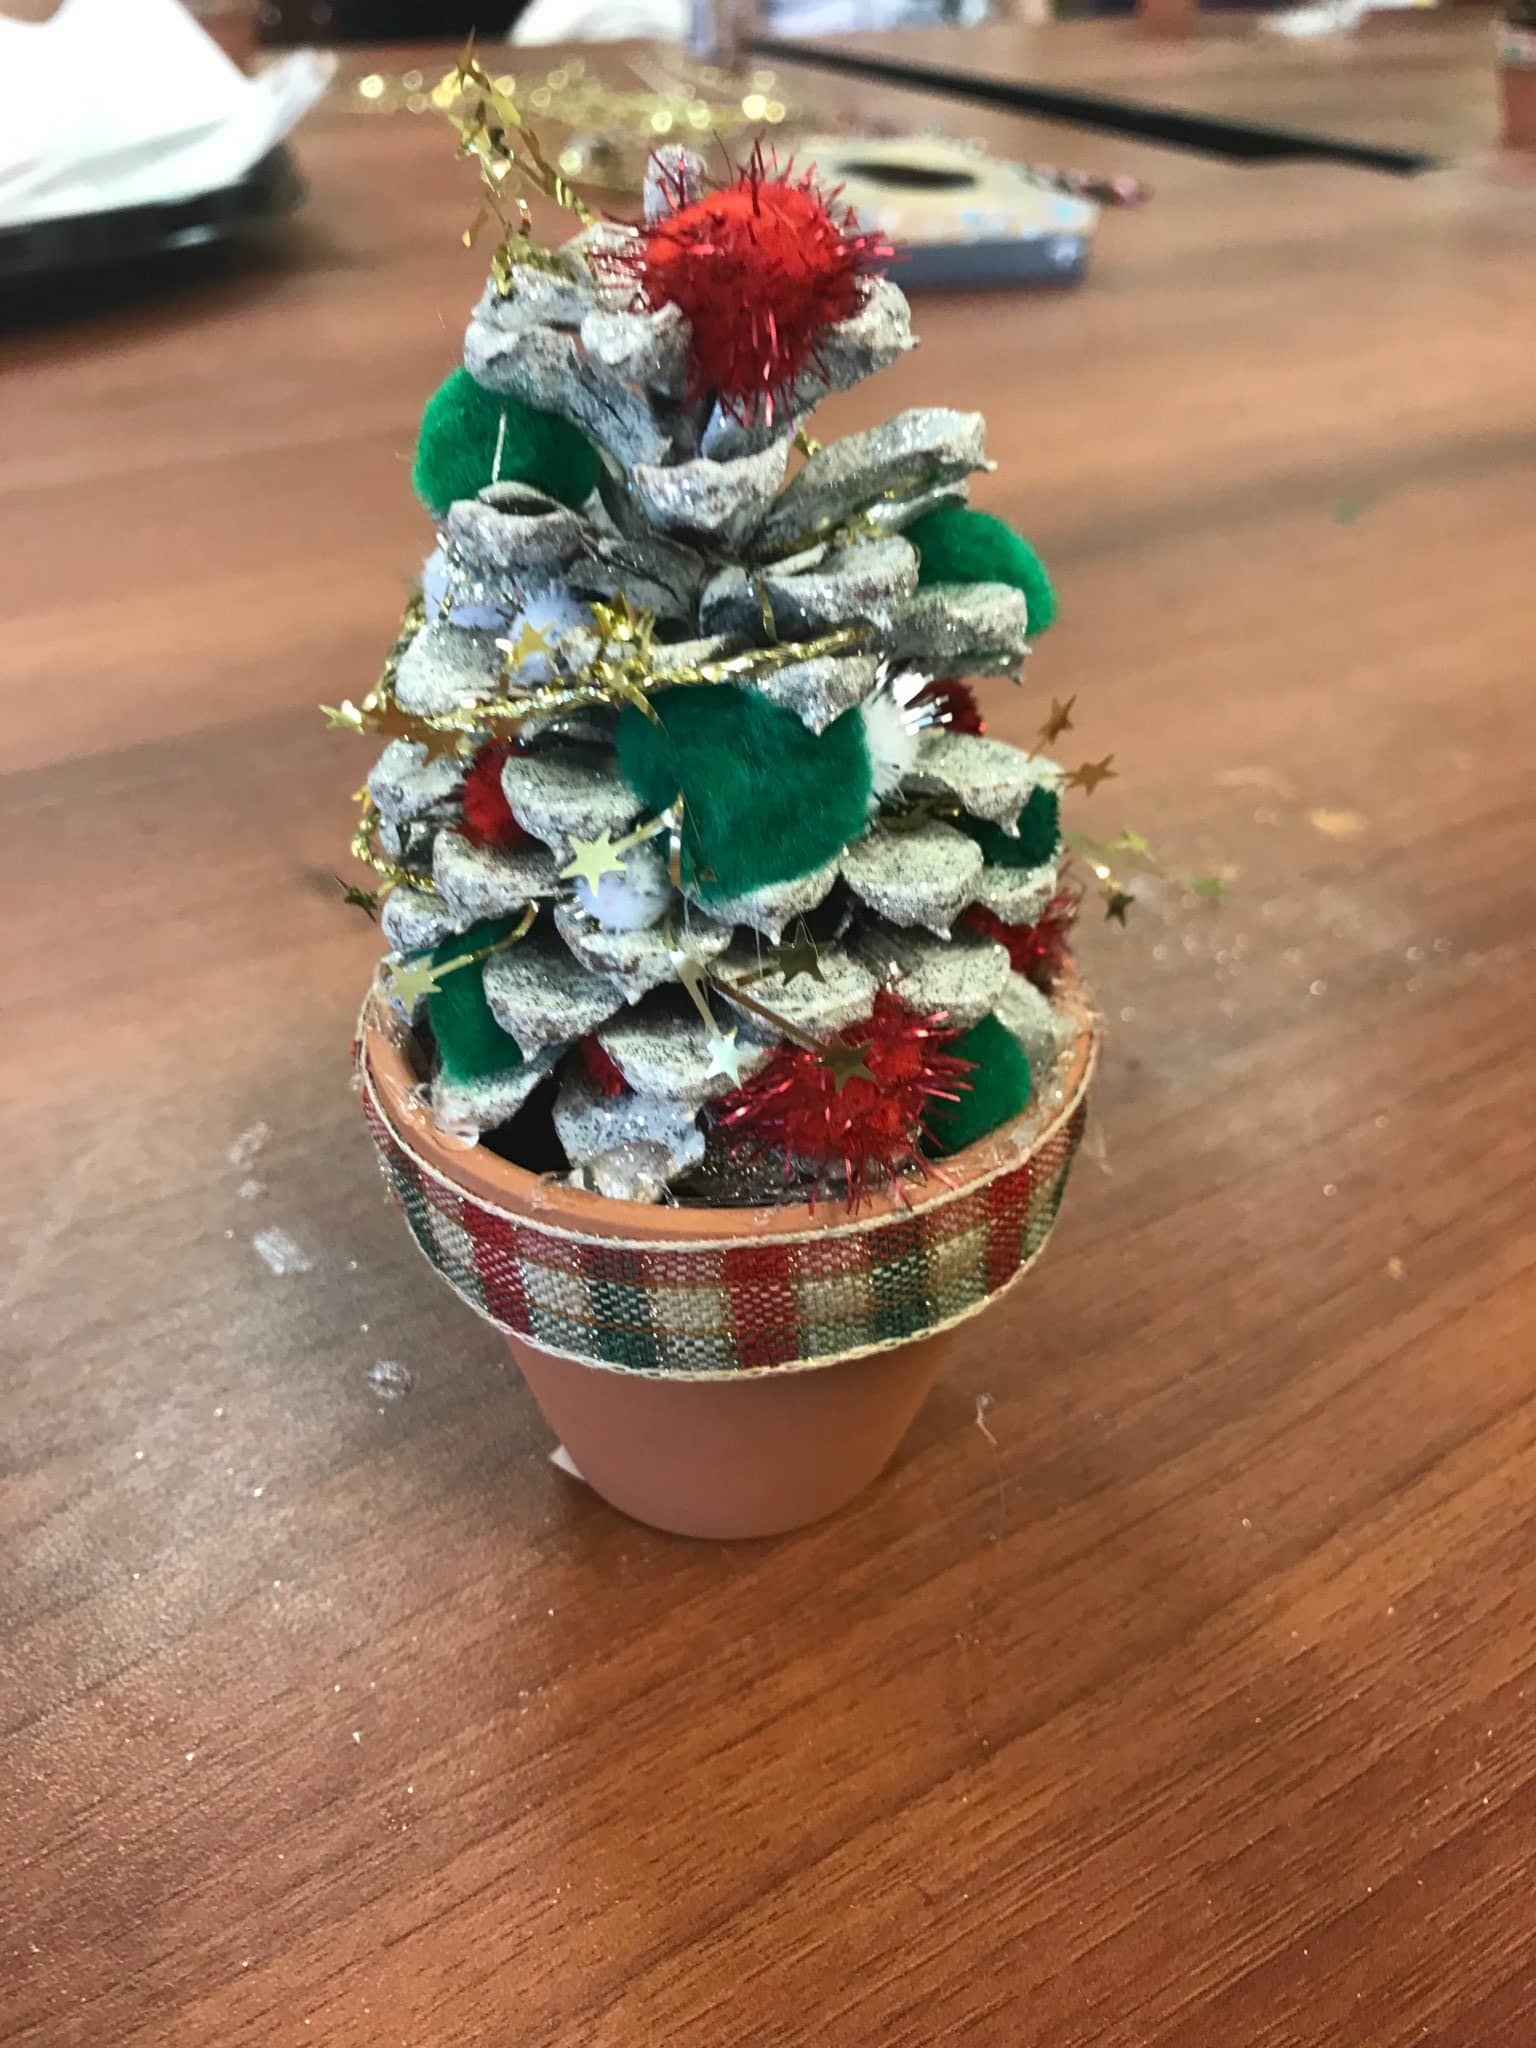 Independence Home Care Helped To Create A Holiday Craft With Saint Peter’s Adult Day Center